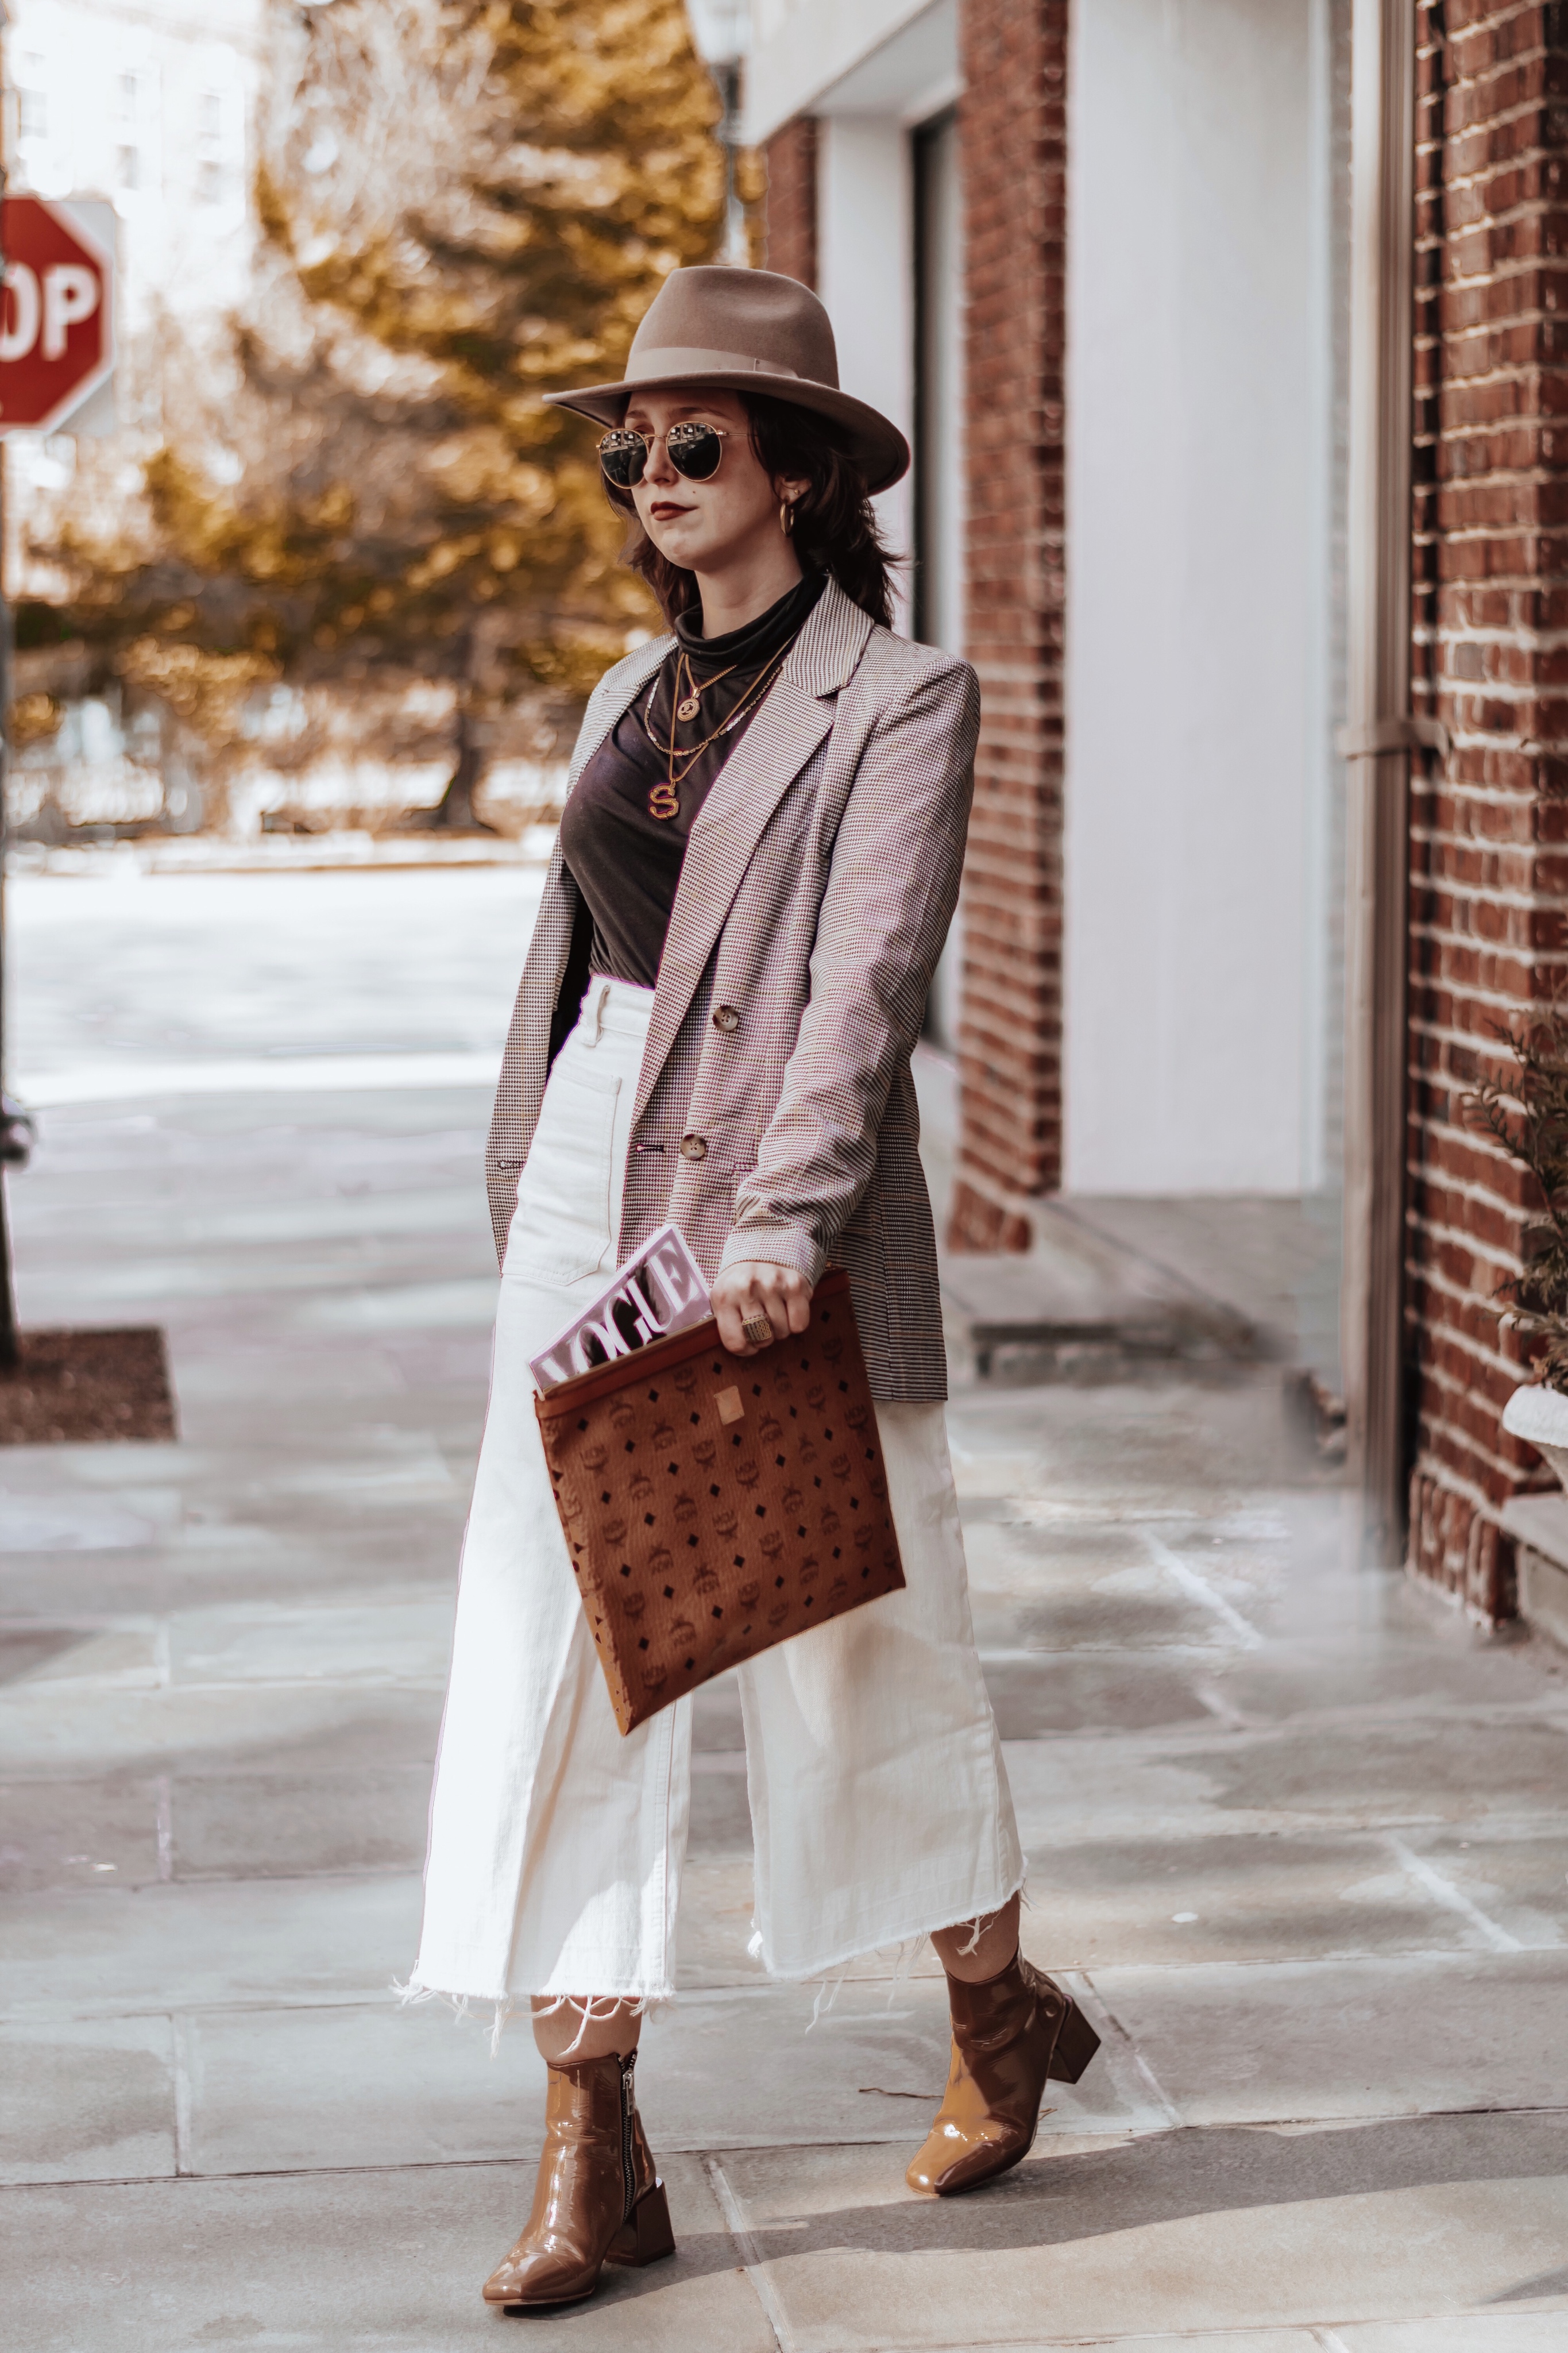 Blogging Tips: Presets - What Are Presets and Do You Need Presets-Spring-Style-Blogger-Outfit-Blazer-Westchester #springstyle #springoutfit #fashion #ootd #blogger #bloggerstyle #streetstyle #fashioninspo